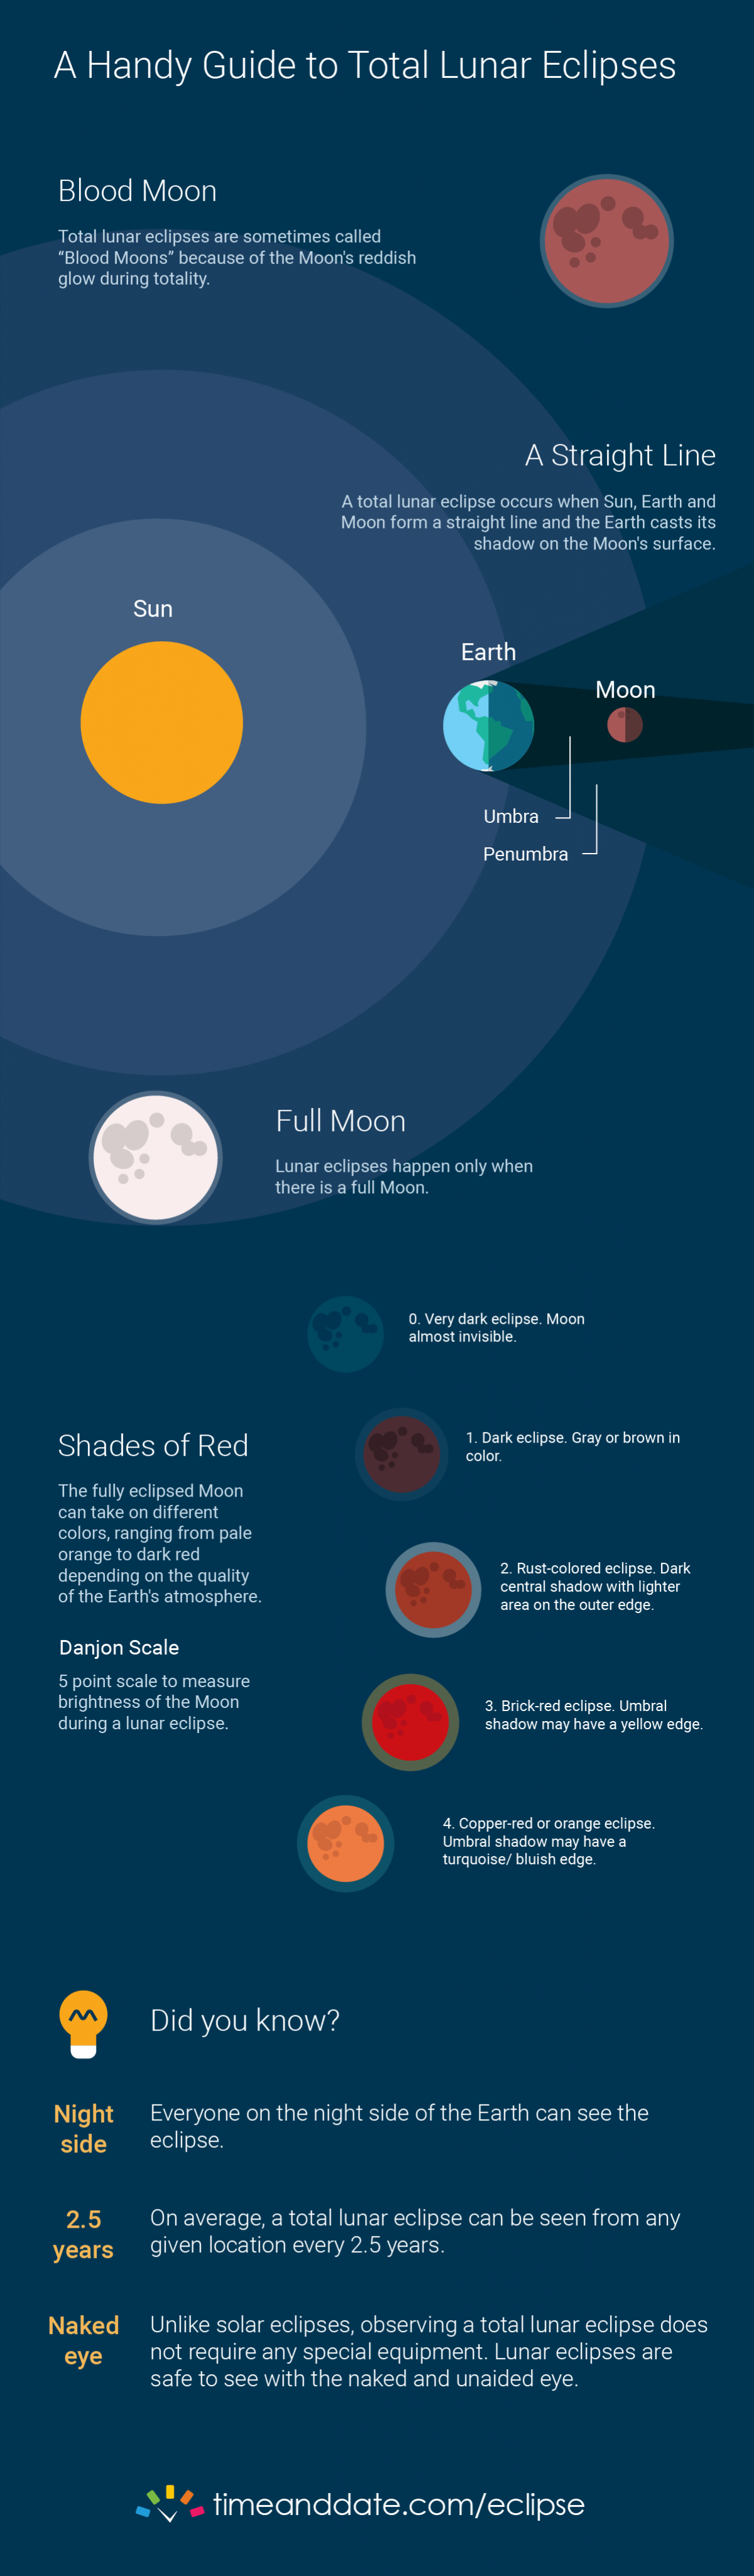 Lunar Eclipse Infographic from www.timeanddate.com/eclipse